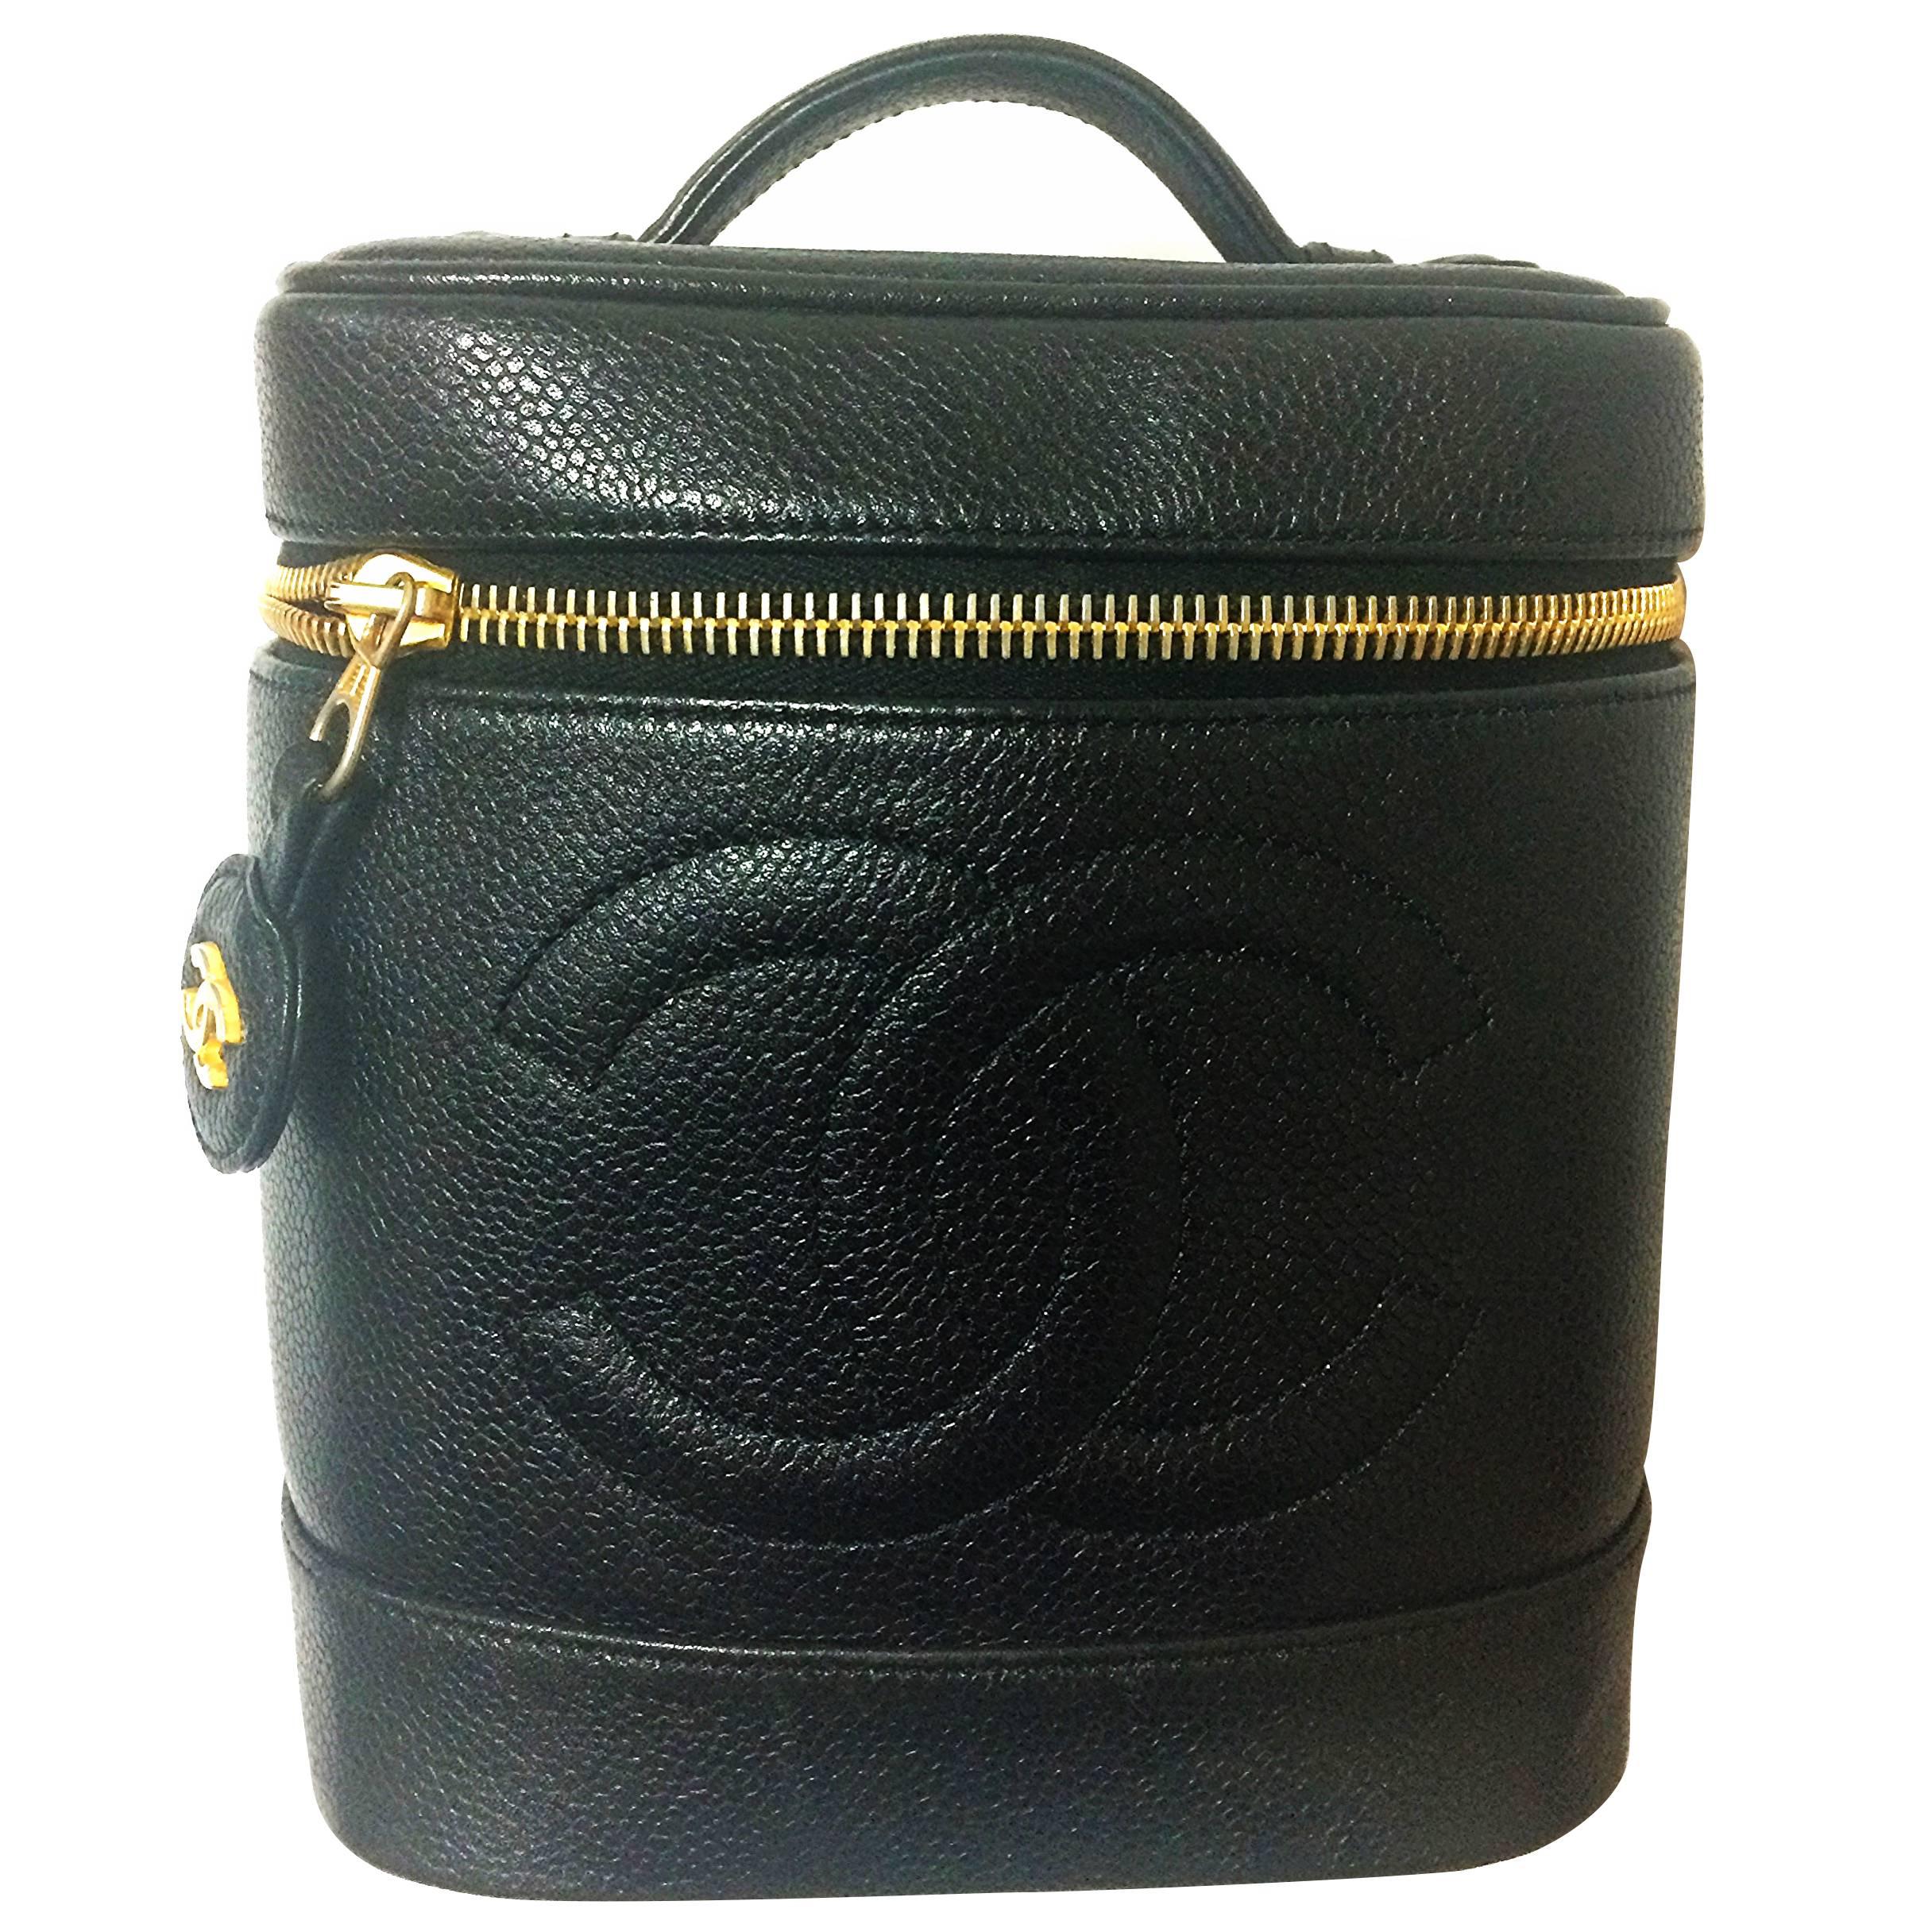 Vintage CHANEL black caviar cosmetic and toiletry mini bag, party vanity bag.